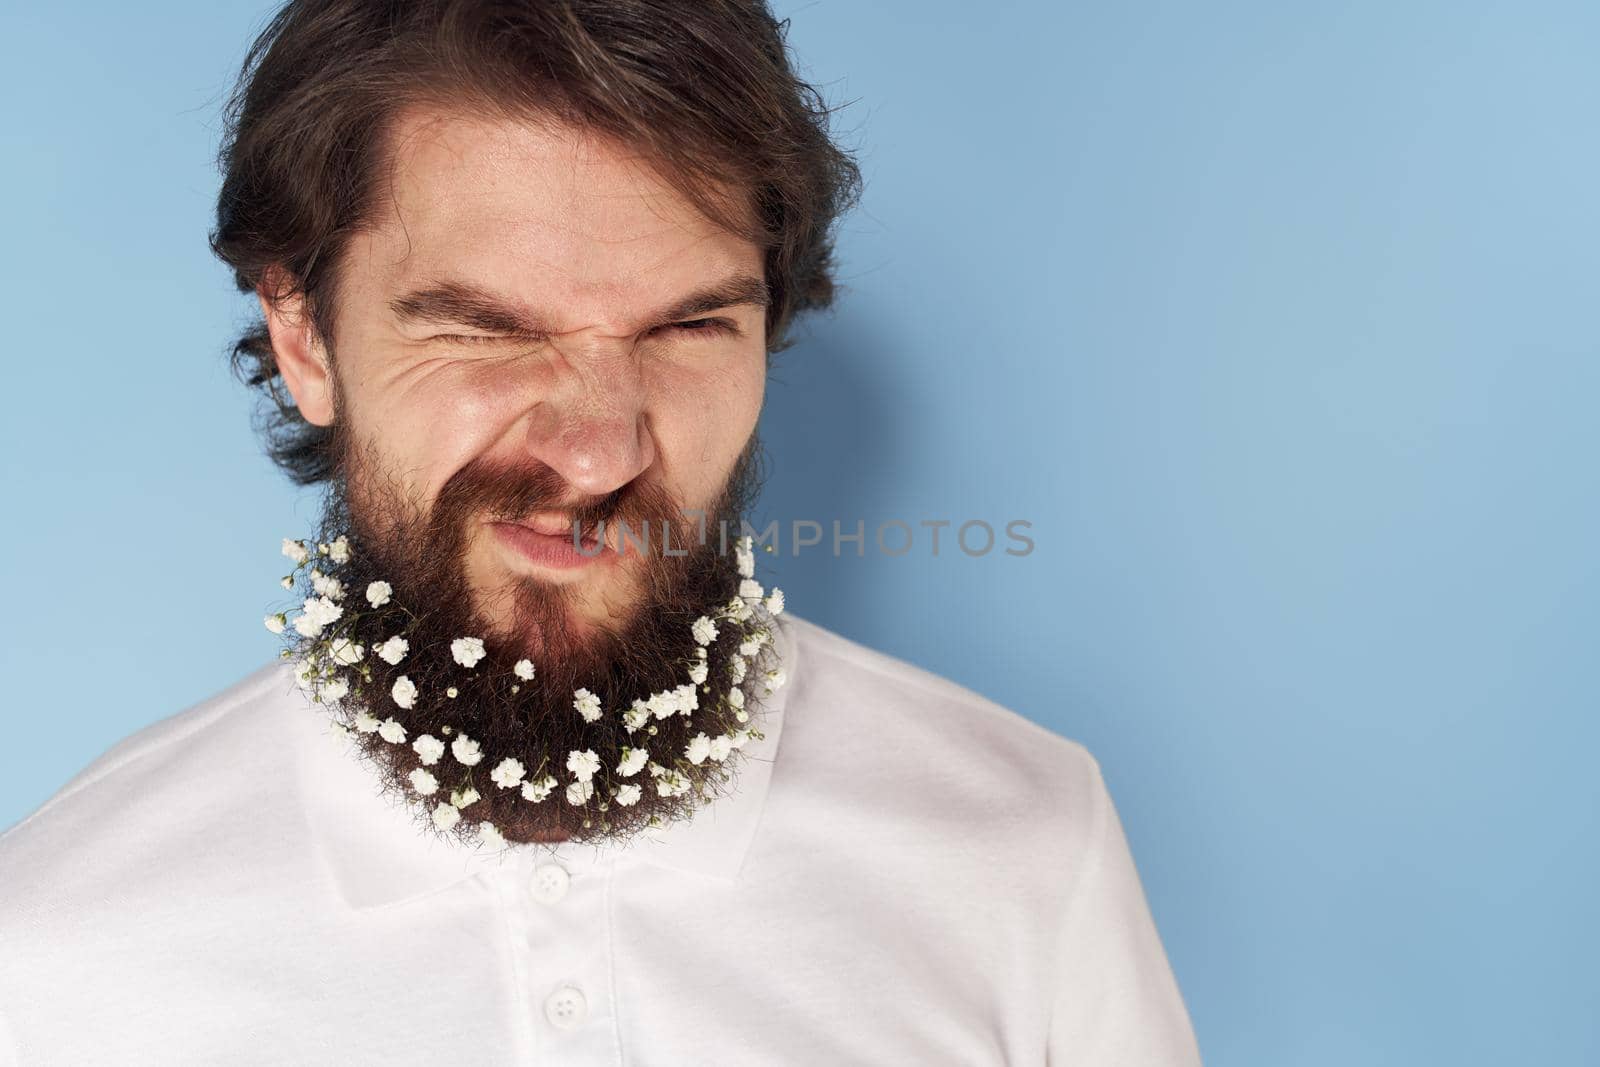 Cute man beard flowers decoration close-up isolated background. High quality photo